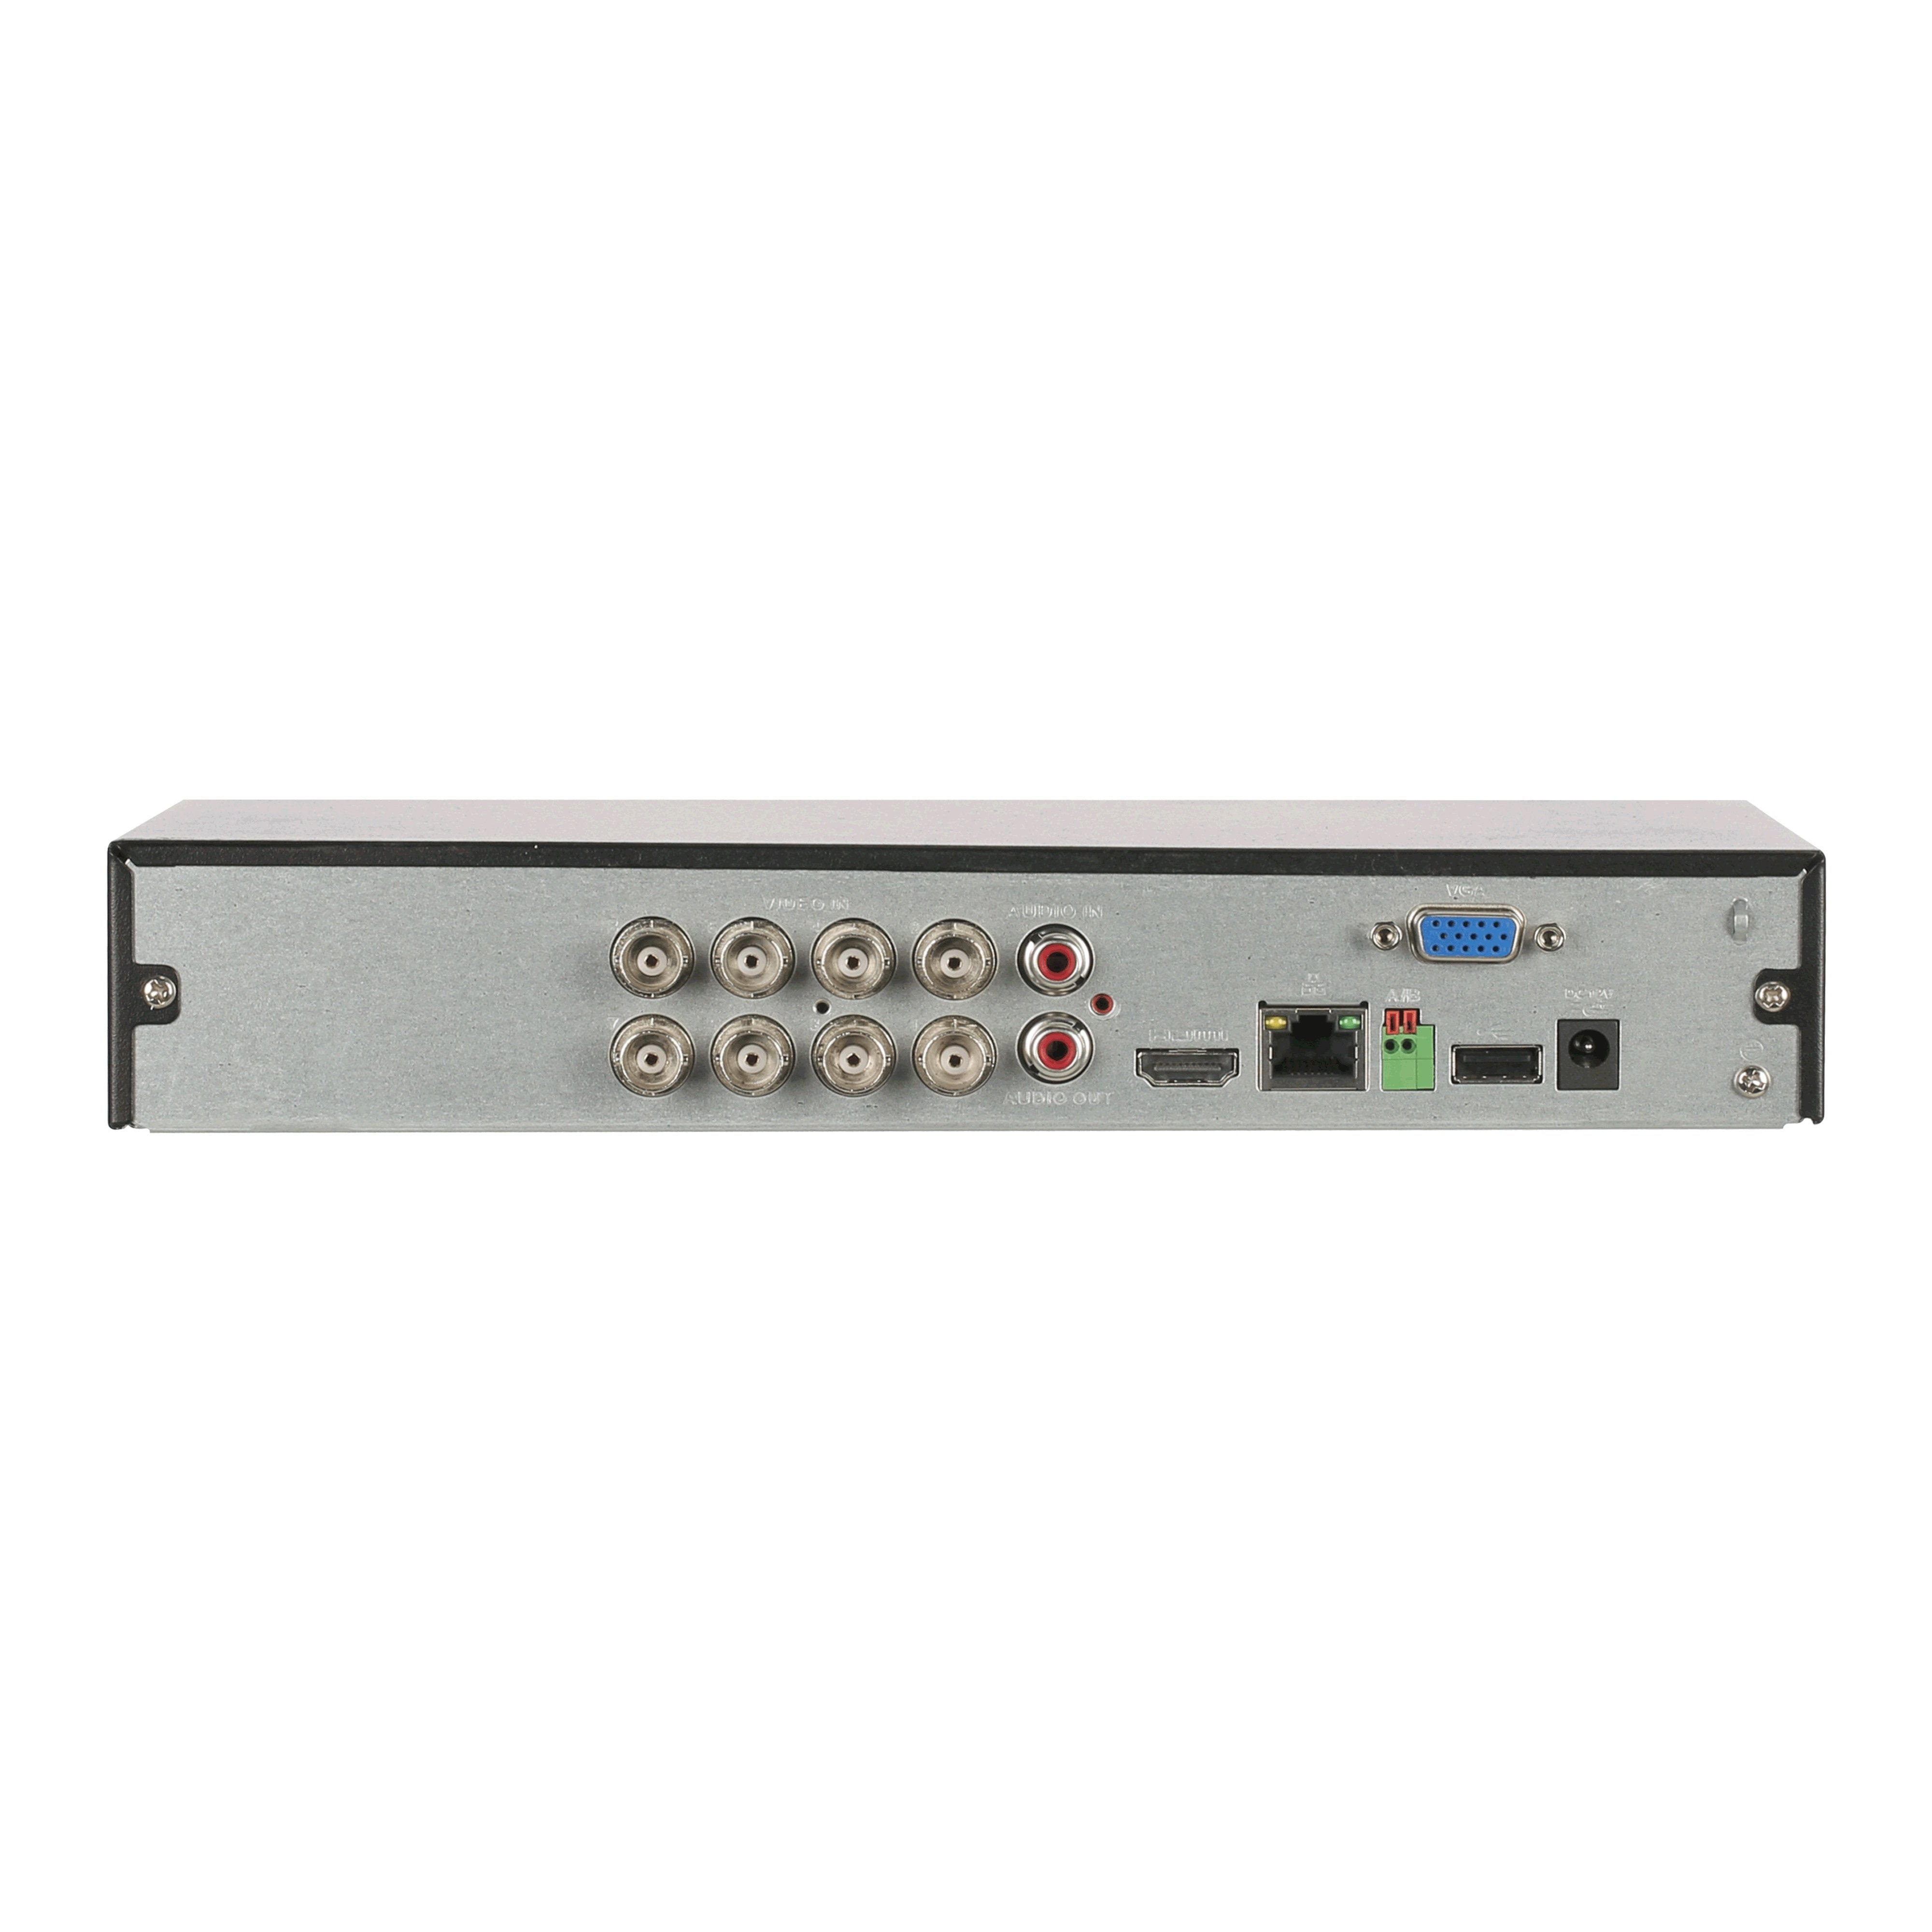 Dahua 8 Channel WizSense Series Penta-Brid 4K 1RU XVR, H.265+, HDCVI / AHD / TVI / CVBS / IP Inputs, Max 16CH IP Up To 8MP, 128Mbps, SMD Plus, Face Recognition, Perimeter Arm / Disarm, 1 x HDD **NO HDD INSTALLED**